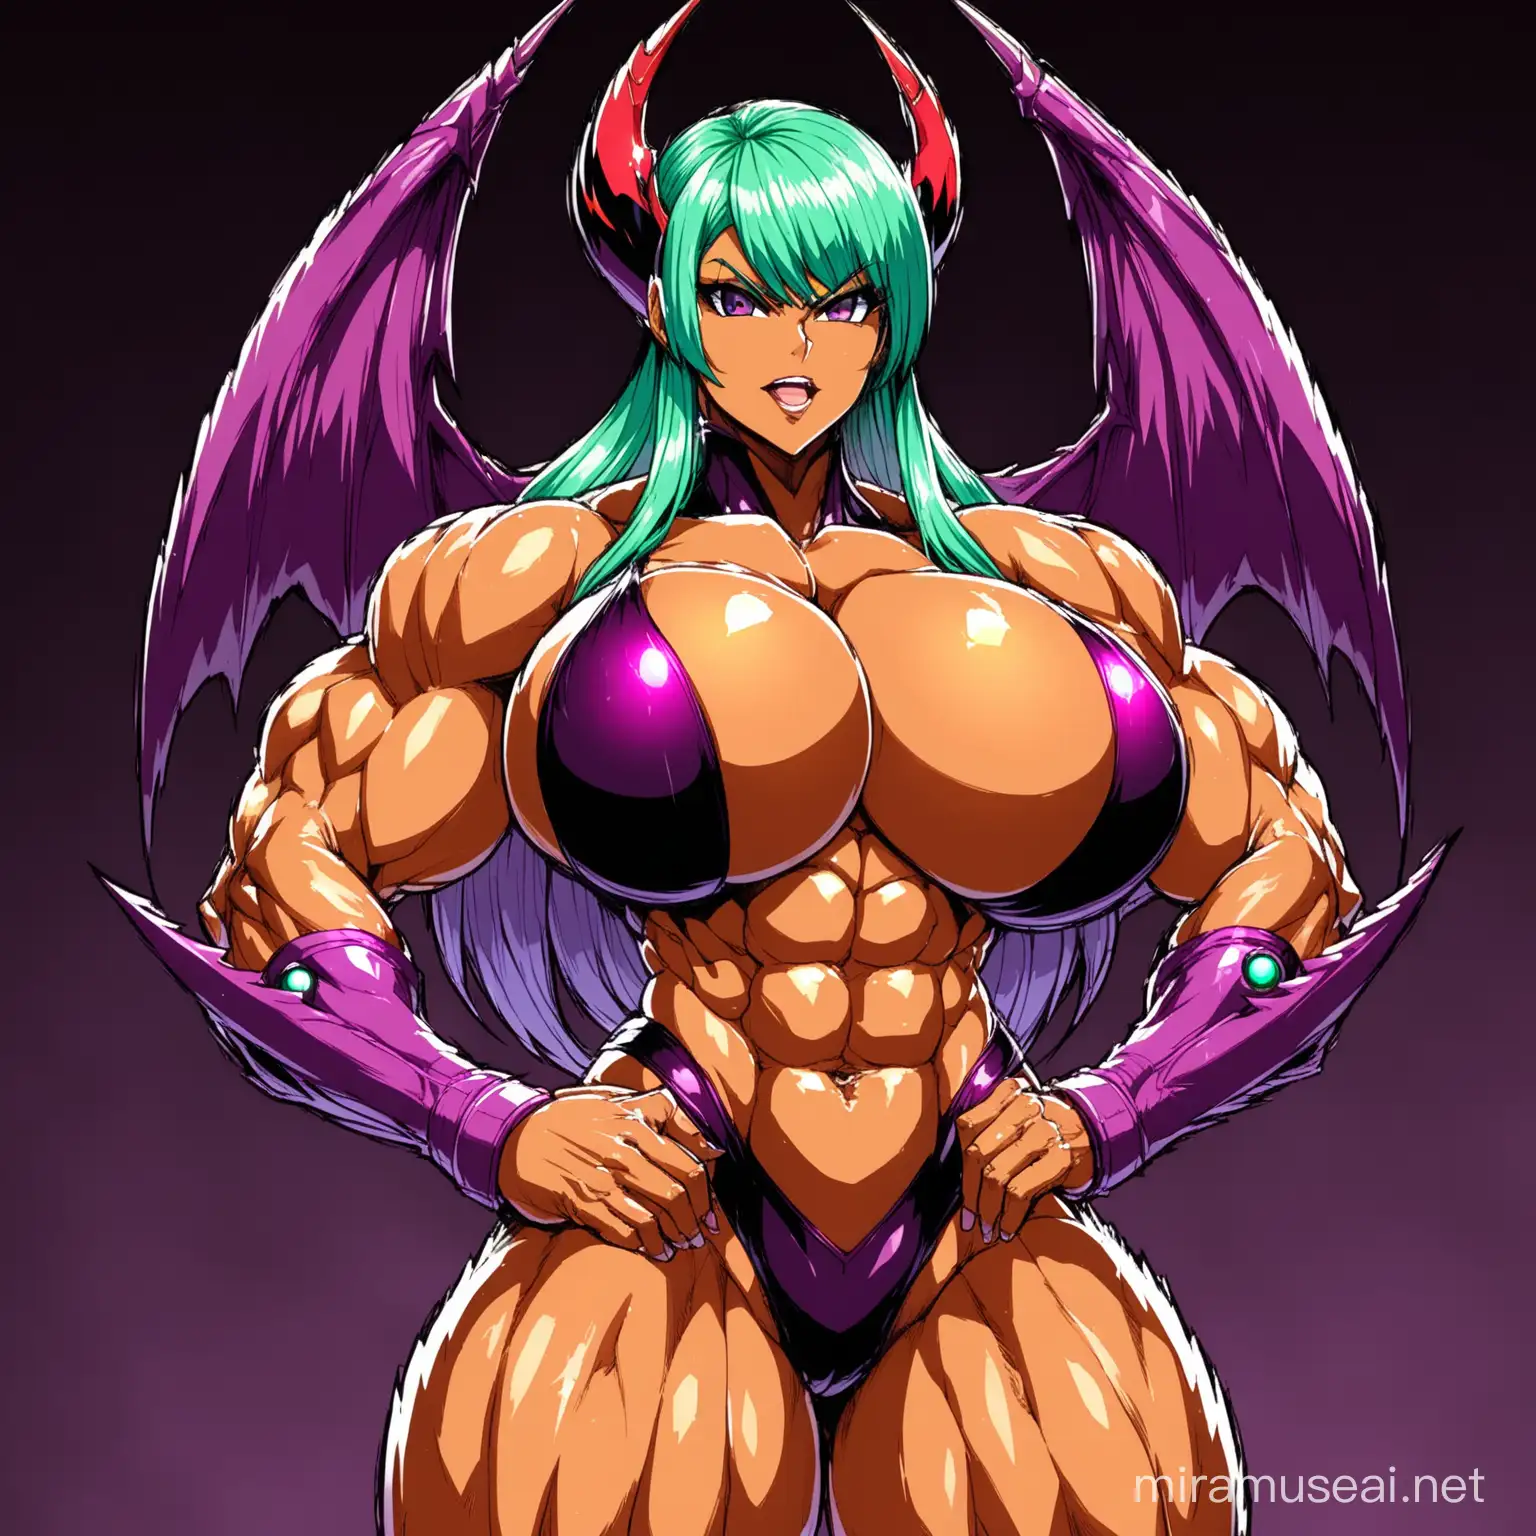 Fusion of: (((Generalissimo Samus Aran from "Metroid" Empress Morrigan Aensland from "Darkstalkers"))), ((((amazingly hyper gigantic breasts)))),(((muscularly voluptuous body))),((((muscular abs,tanned-skin)))), by artist "Sui Ishida",